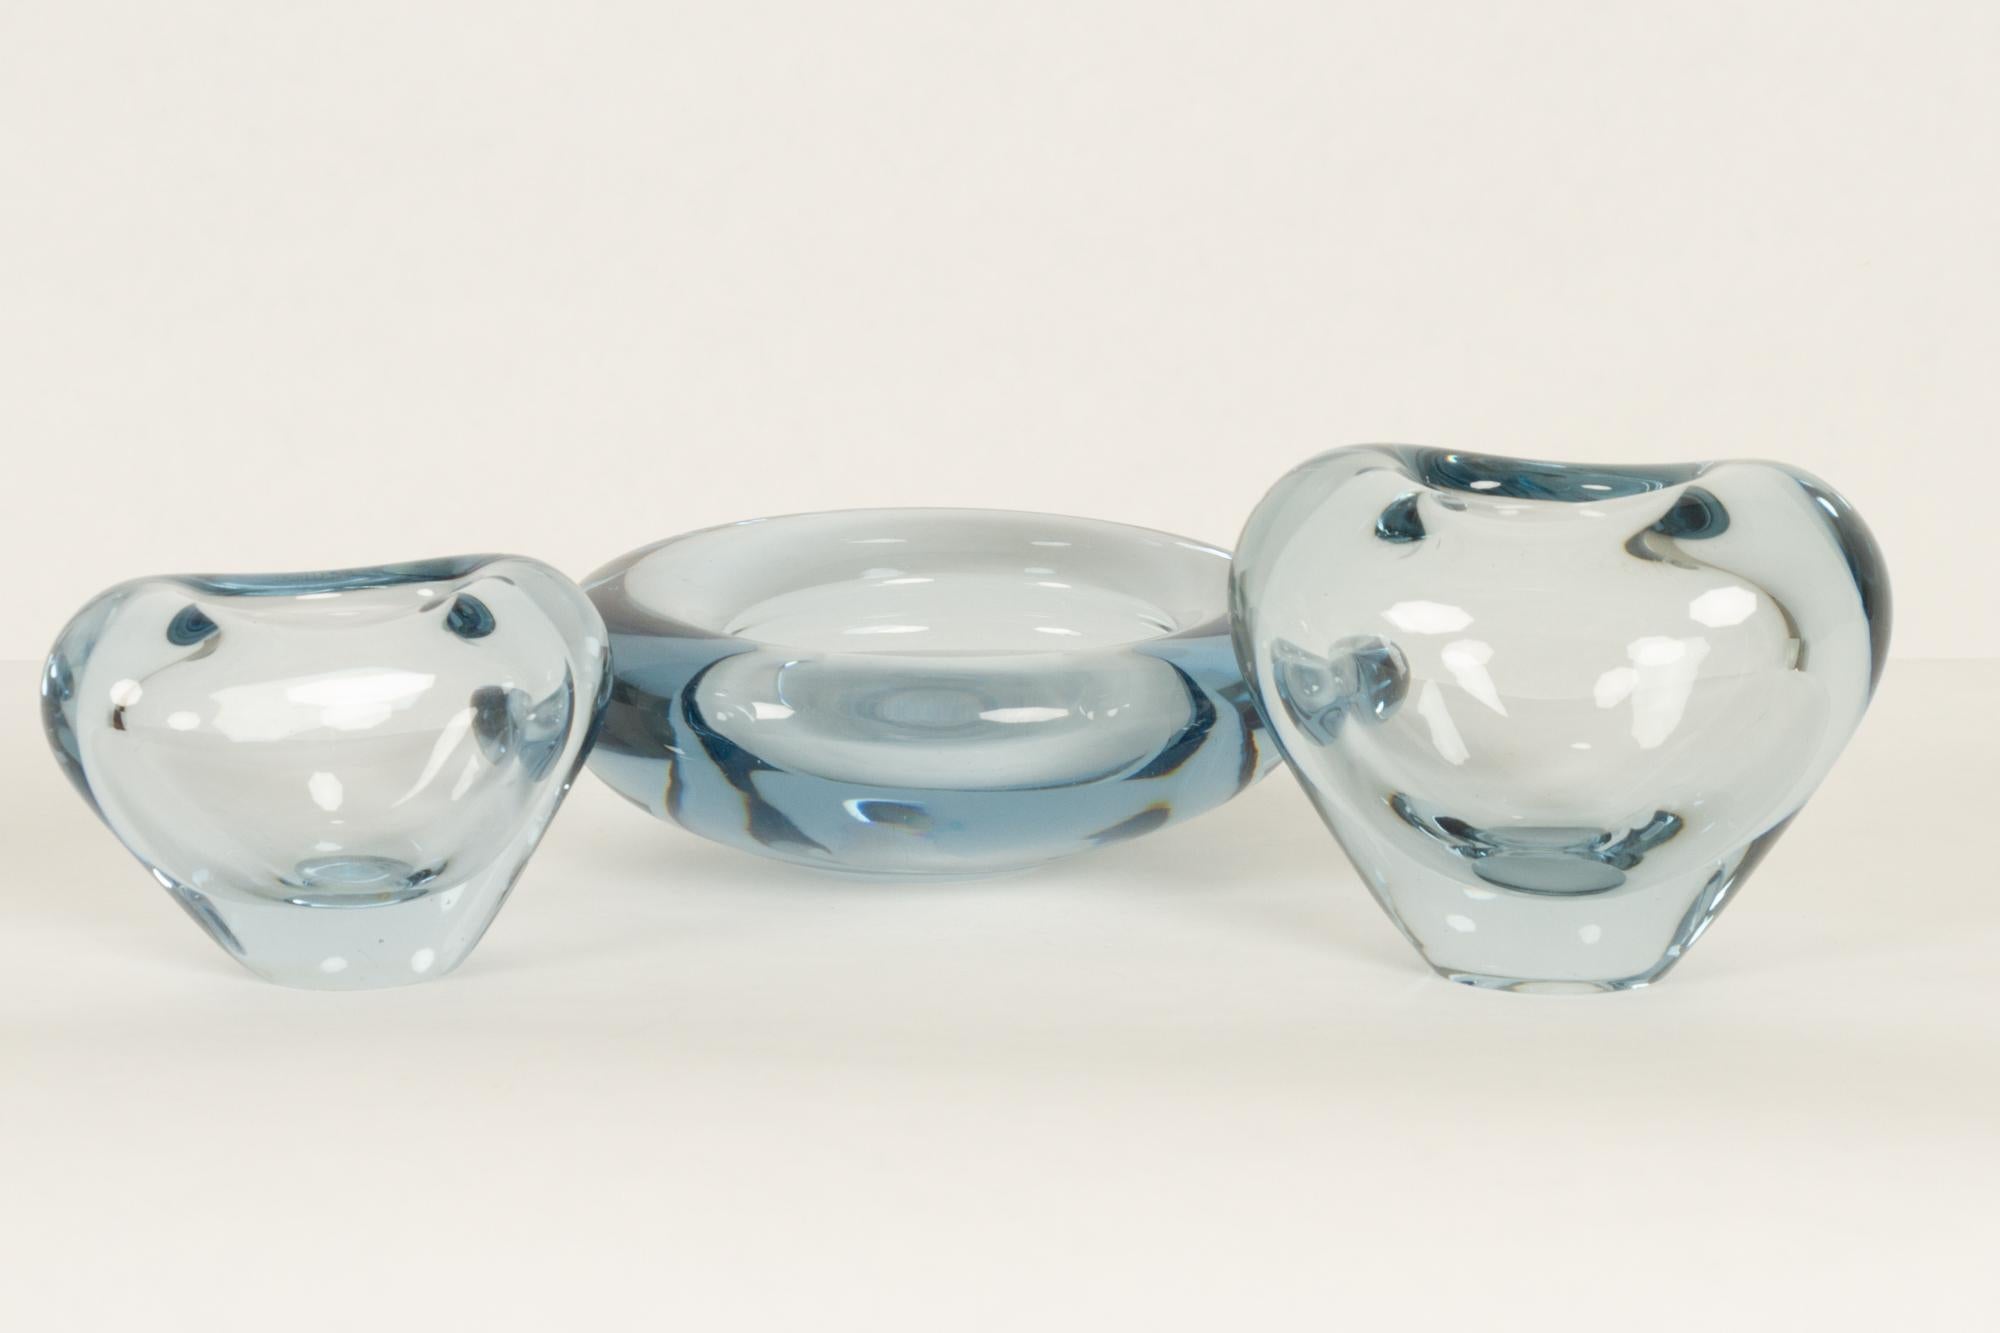 Danish glass vases and bowl by Per Lütken 1950s
Set of two 